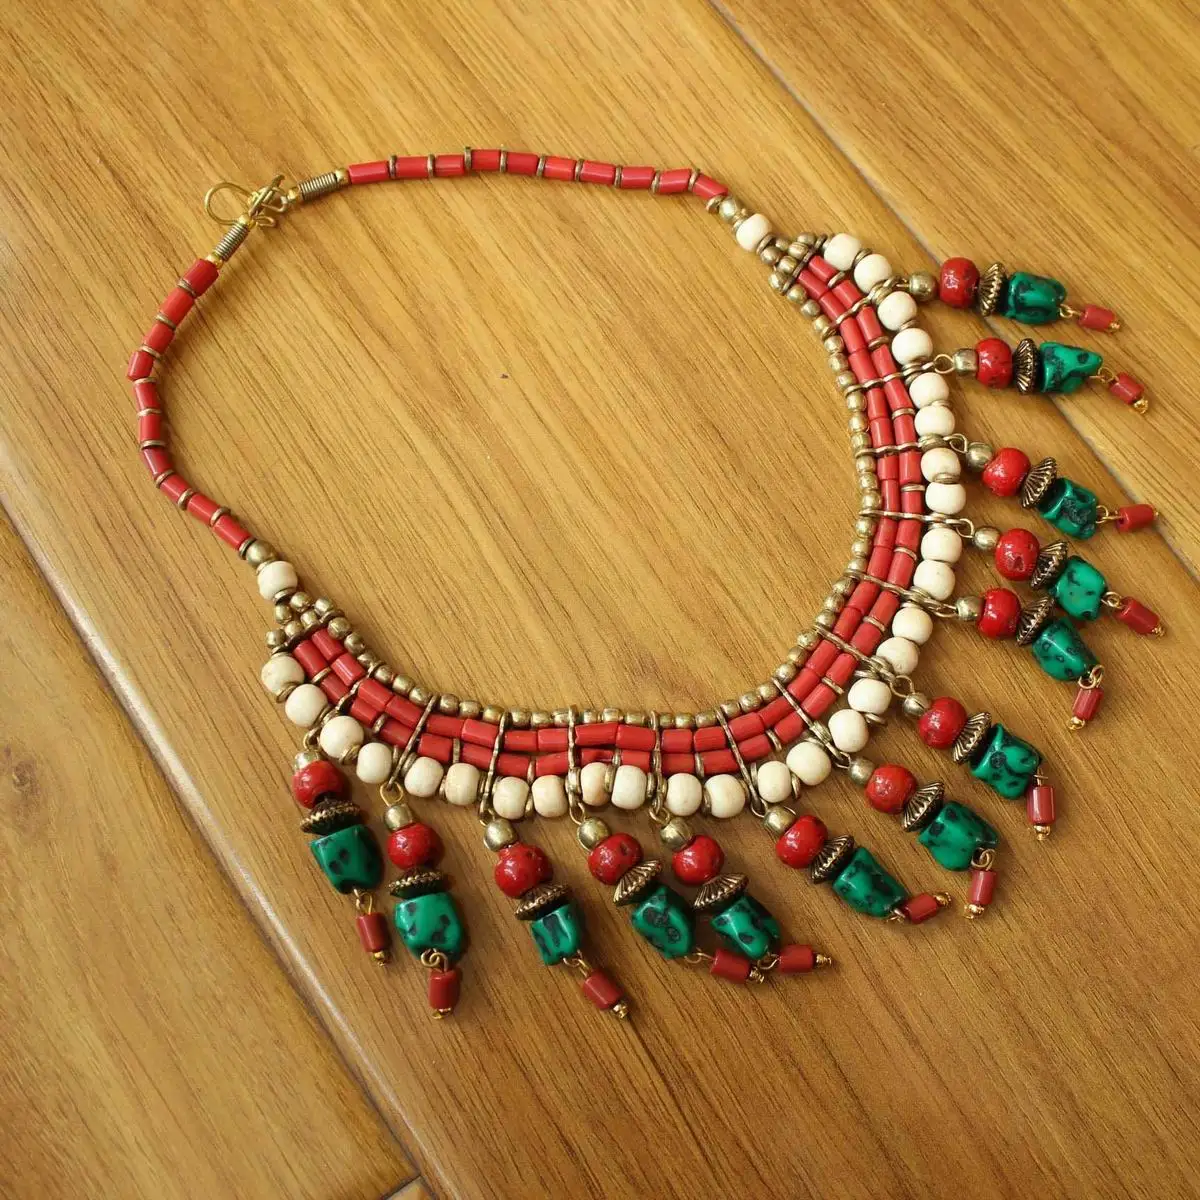 

NK151 Tibetan Jewelry Handmade Nepal Brass Metal Coral Turquoises Colorful Beads Charm Necklace